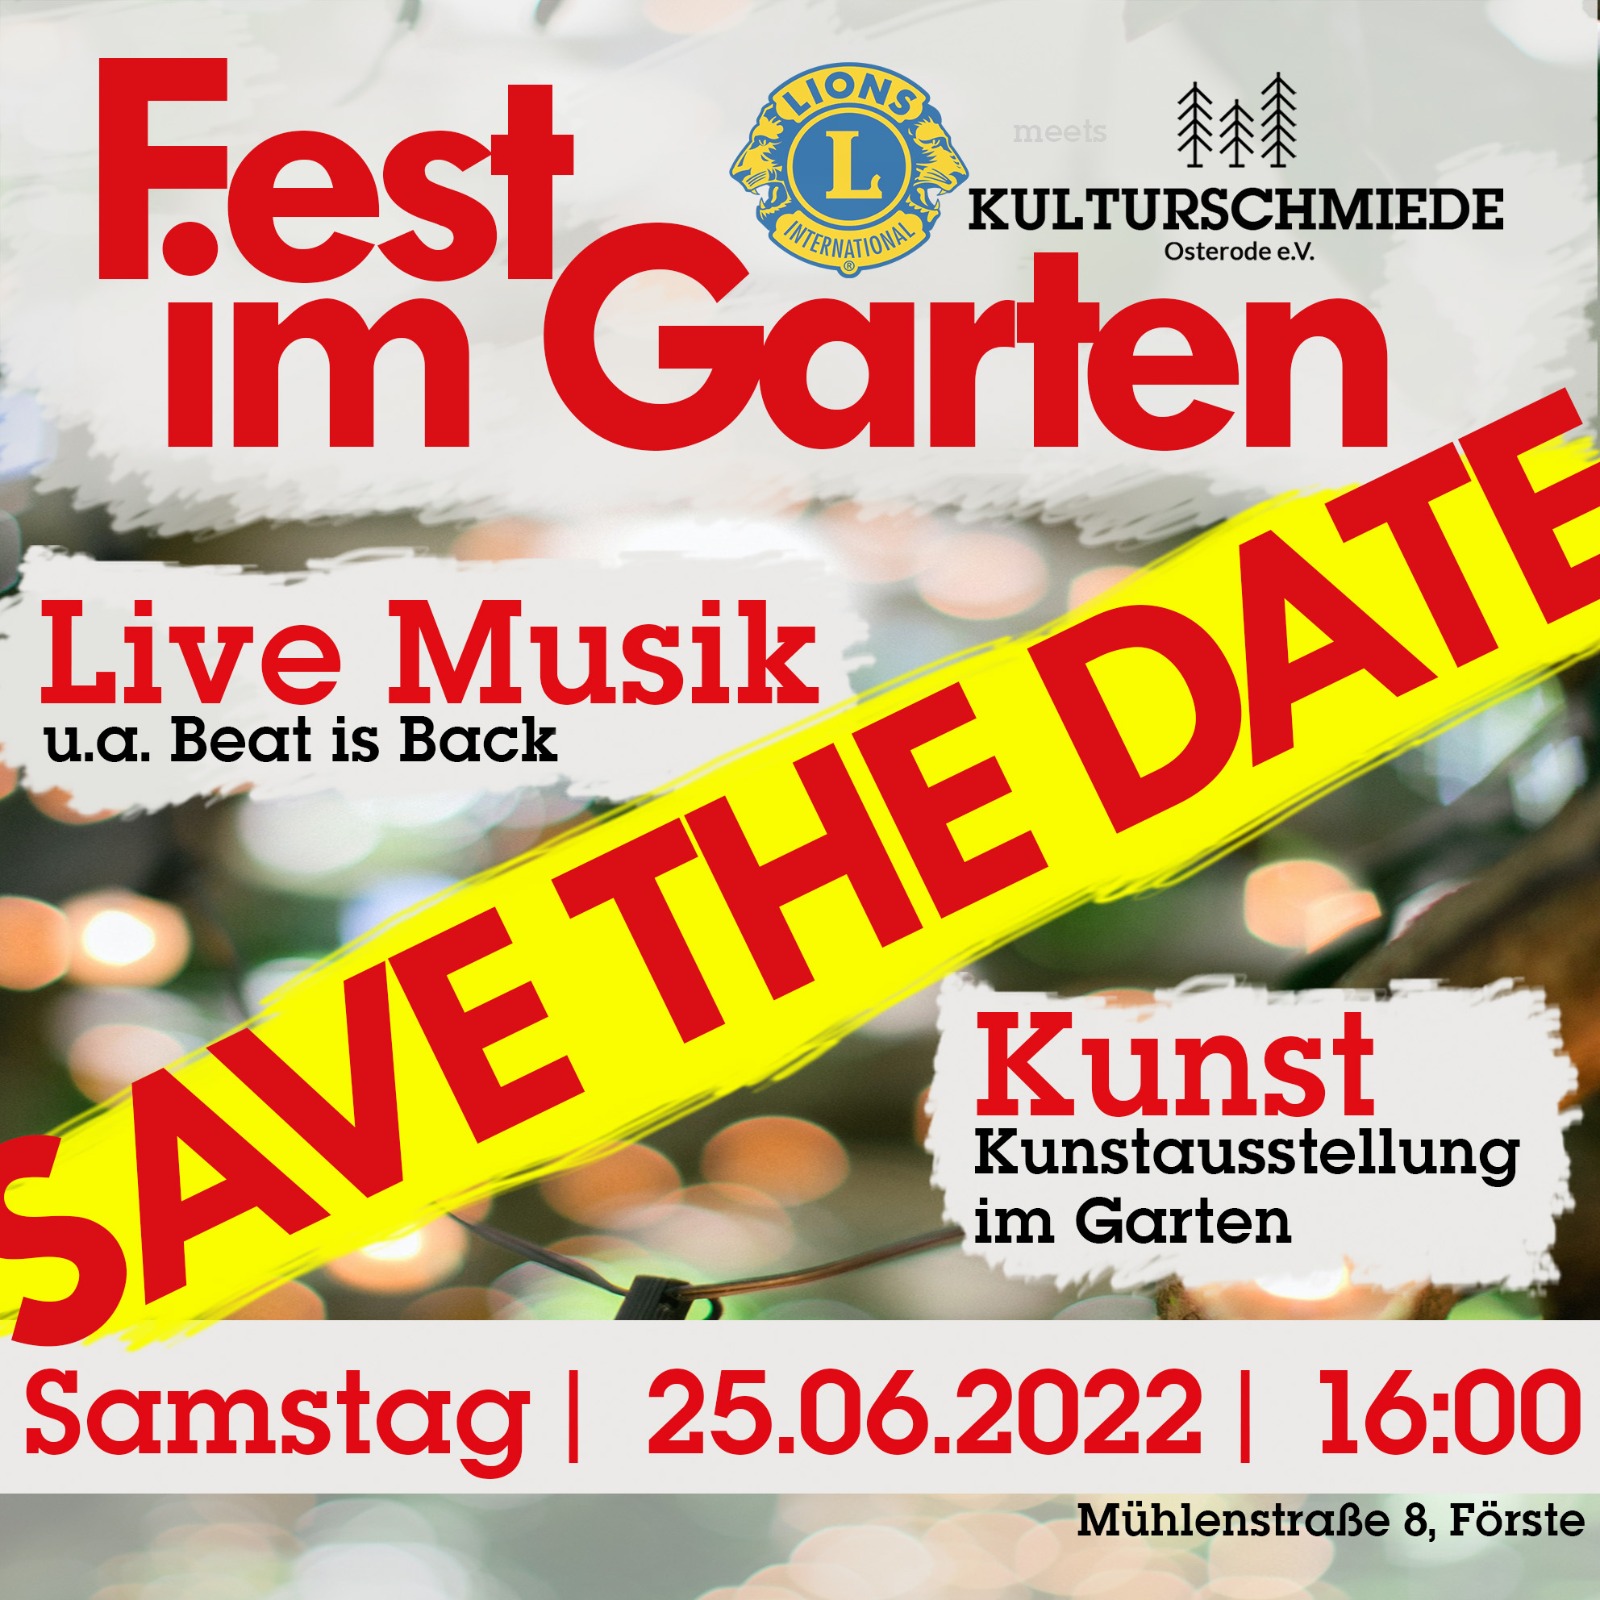 Flyer "Save the Date"